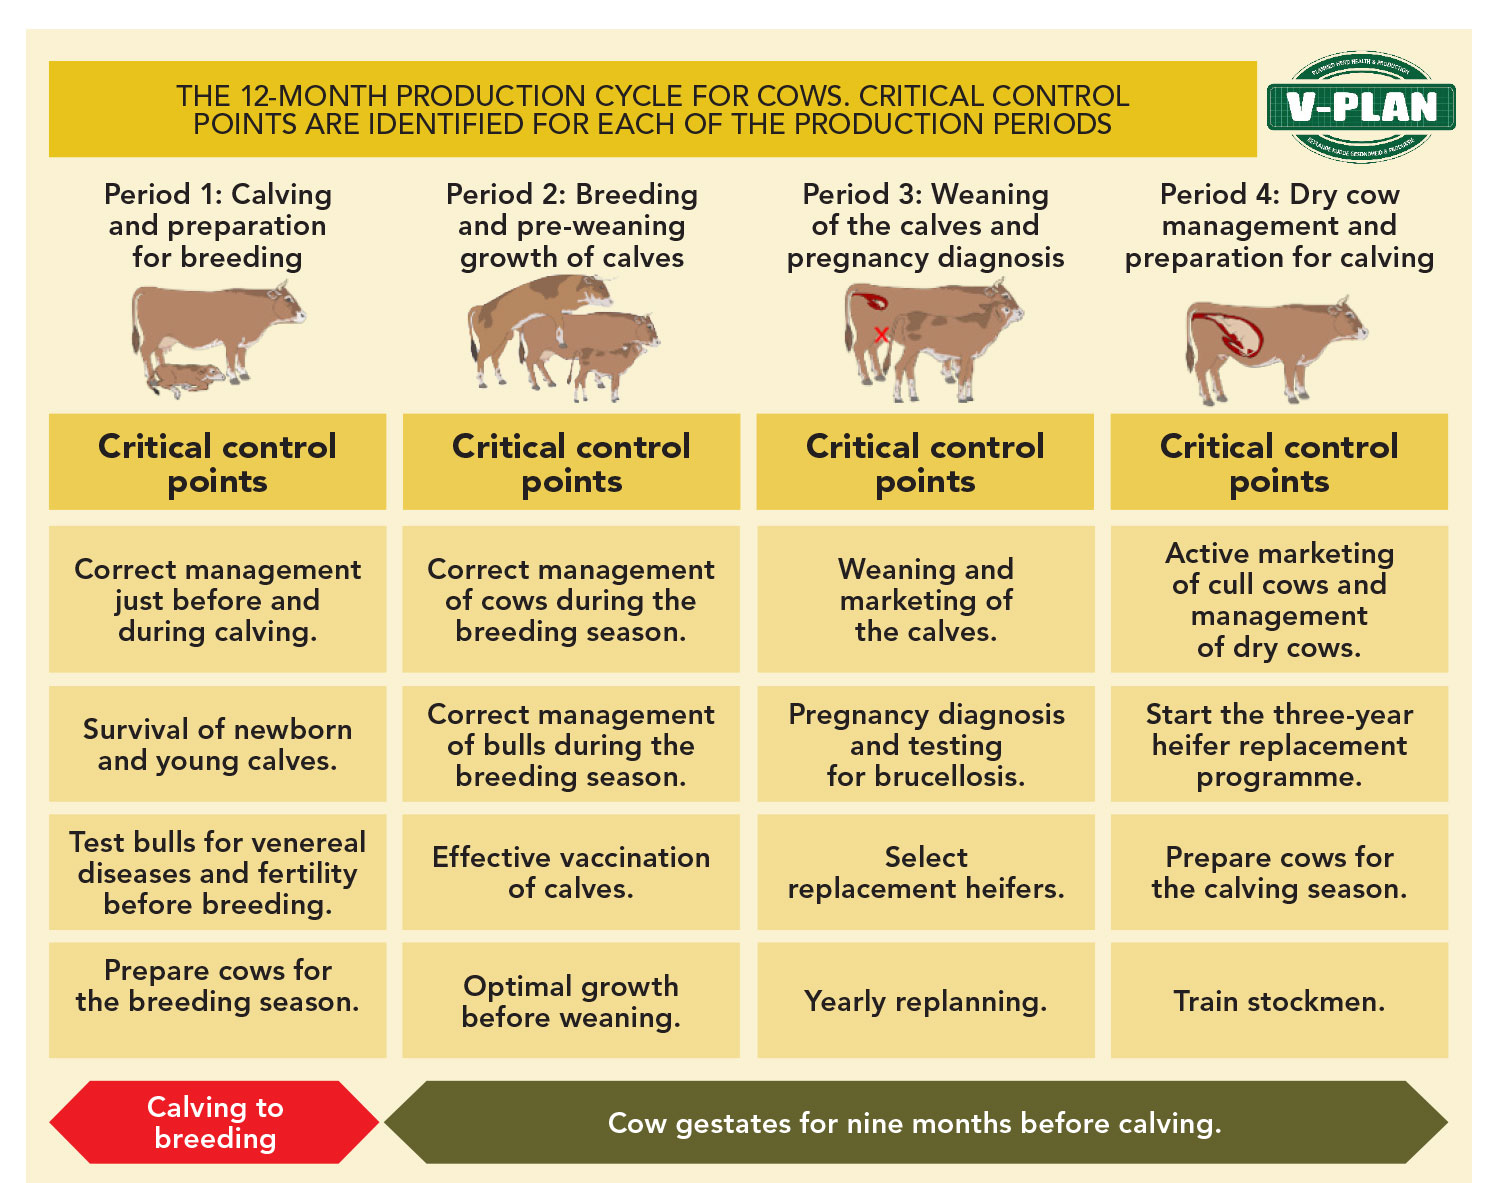 A herd health and production management plan